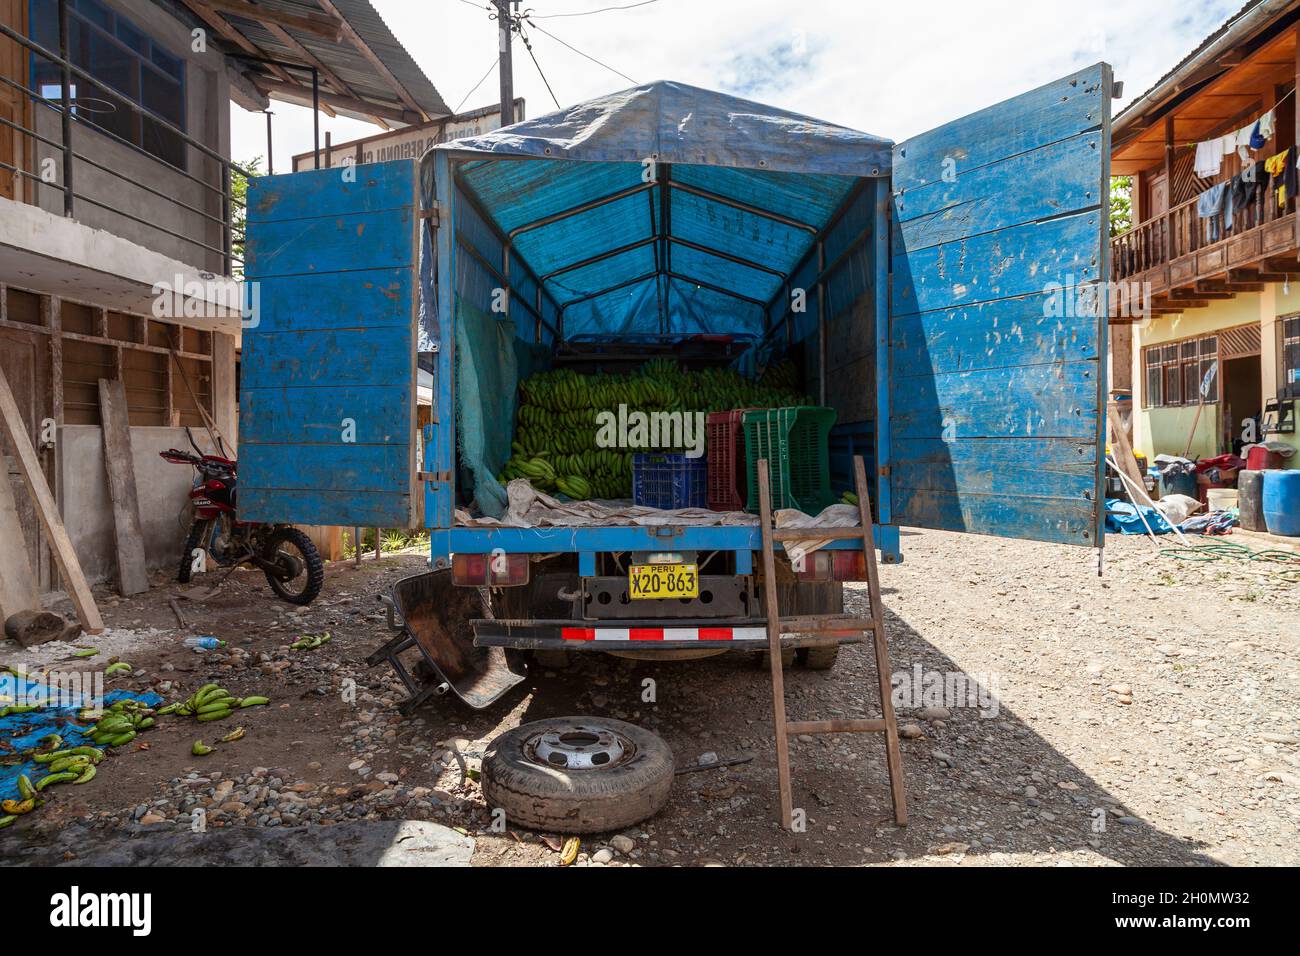 Pilcopata, Peru - April 10, 2014: A transport truck, loaded with plantains and bananas, parked in the surroundings of the small town of Pilcopata Stock Photo